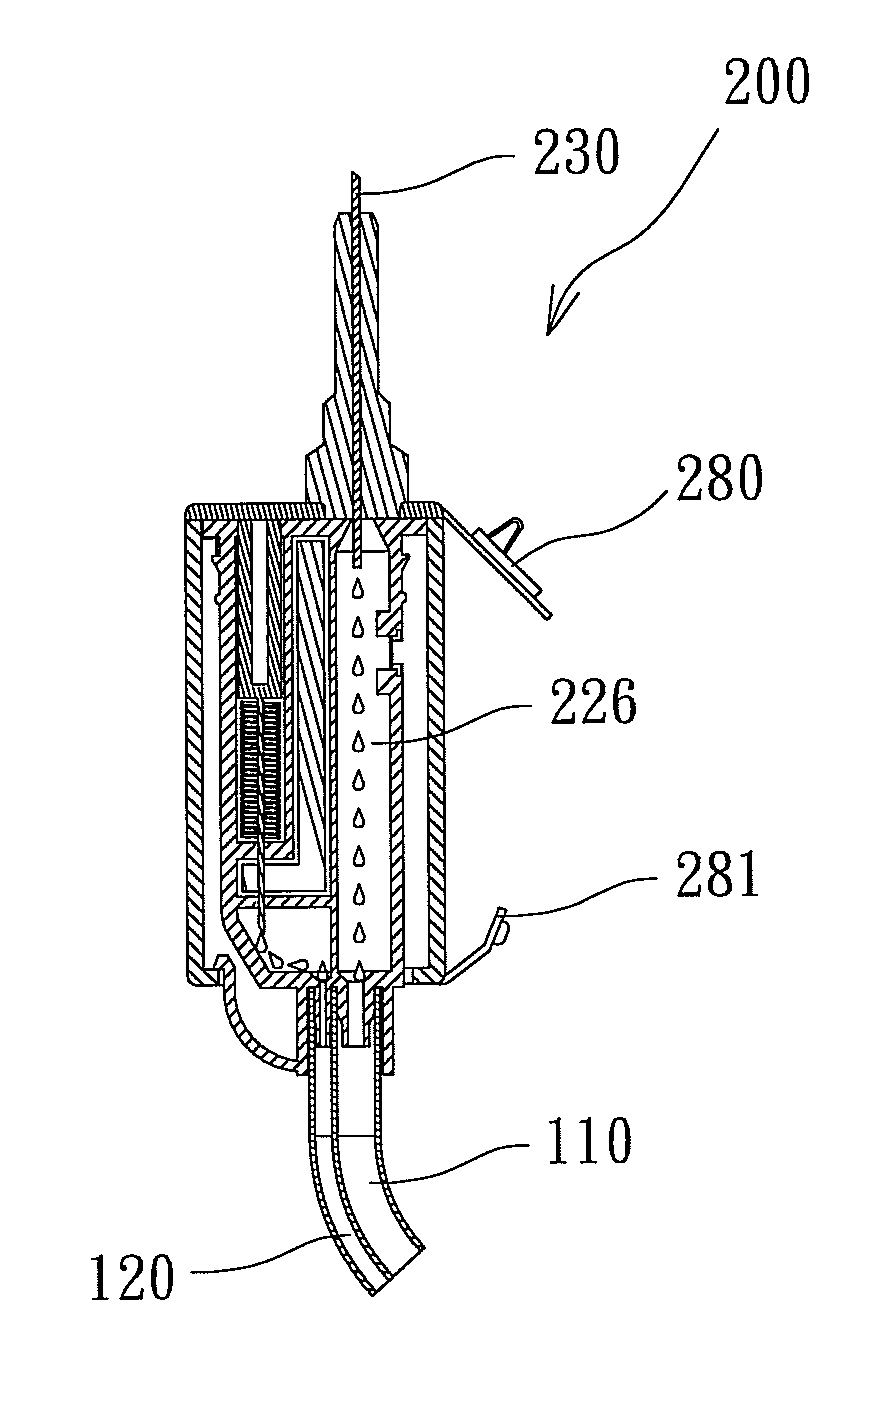 Single use intravenous therapy administering device with  needle safety covers